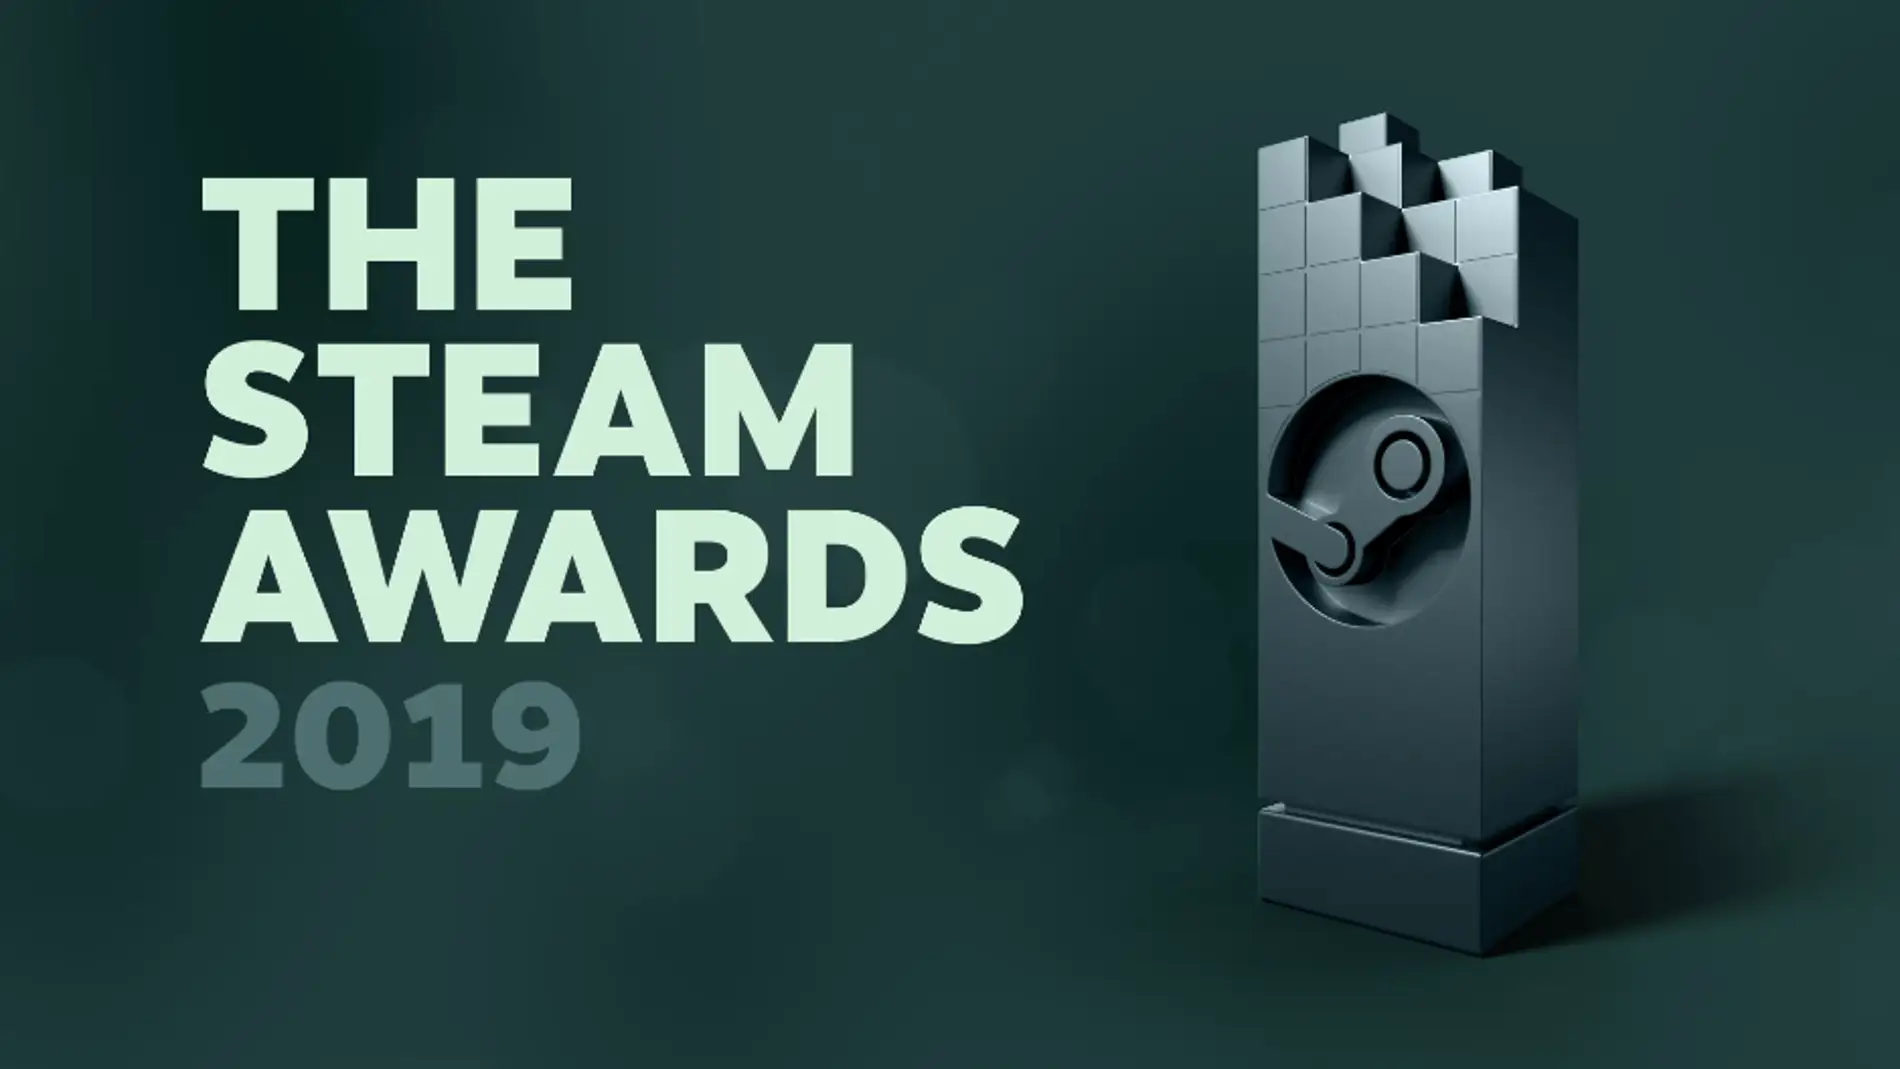 The Steam Awards 